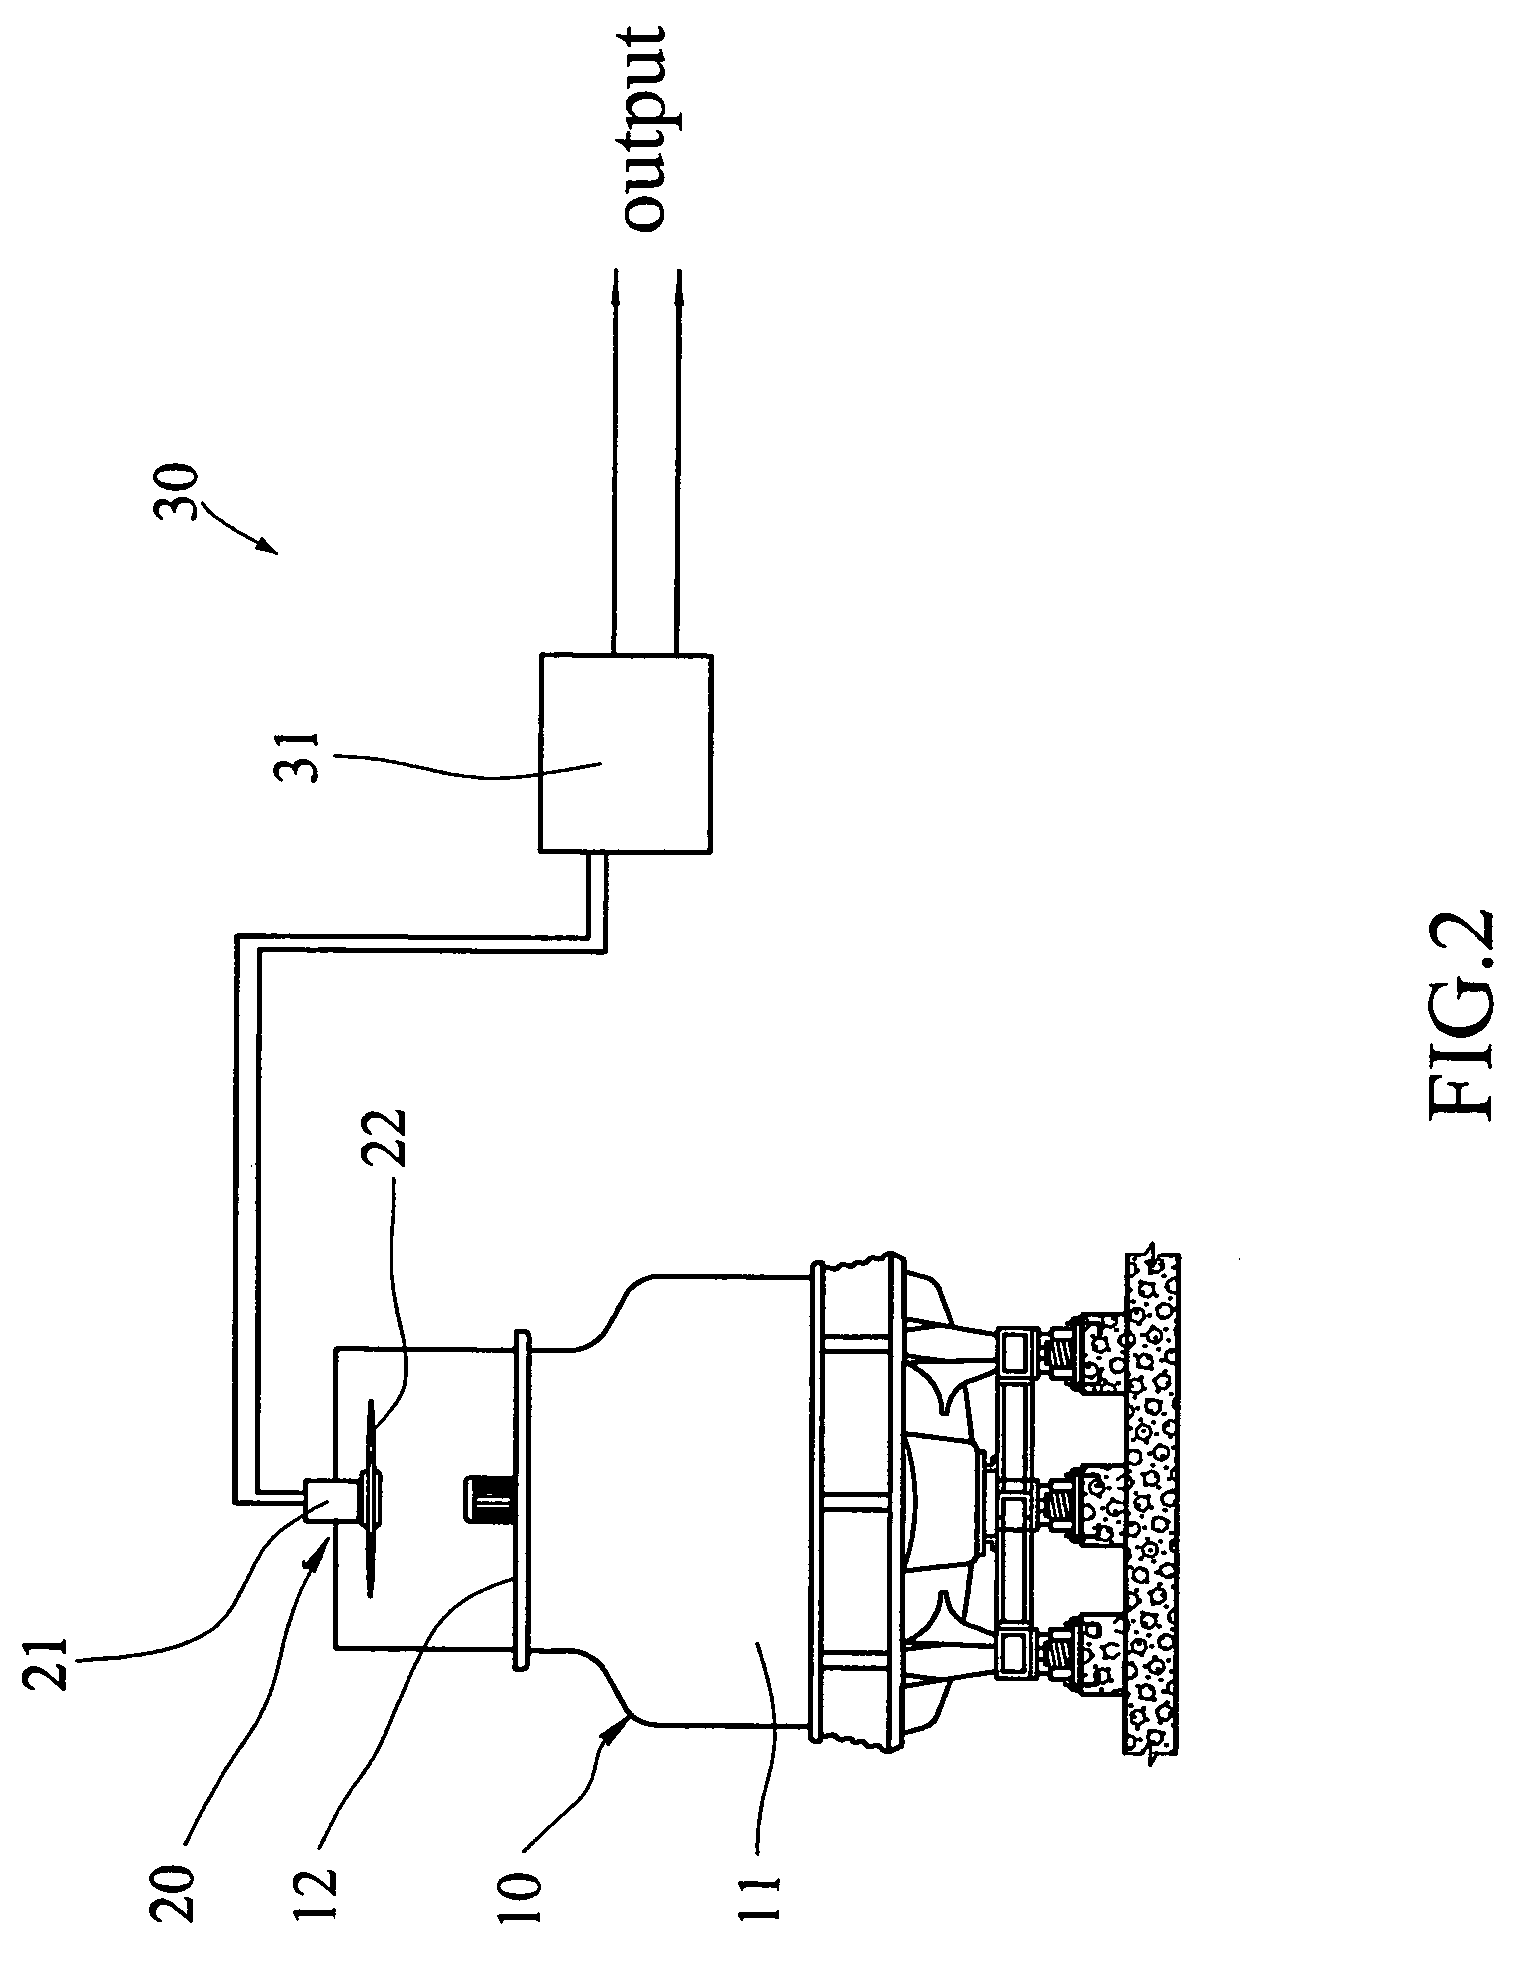 Method and apparatus for generating electricity by waste airflow of air conditioning equipment